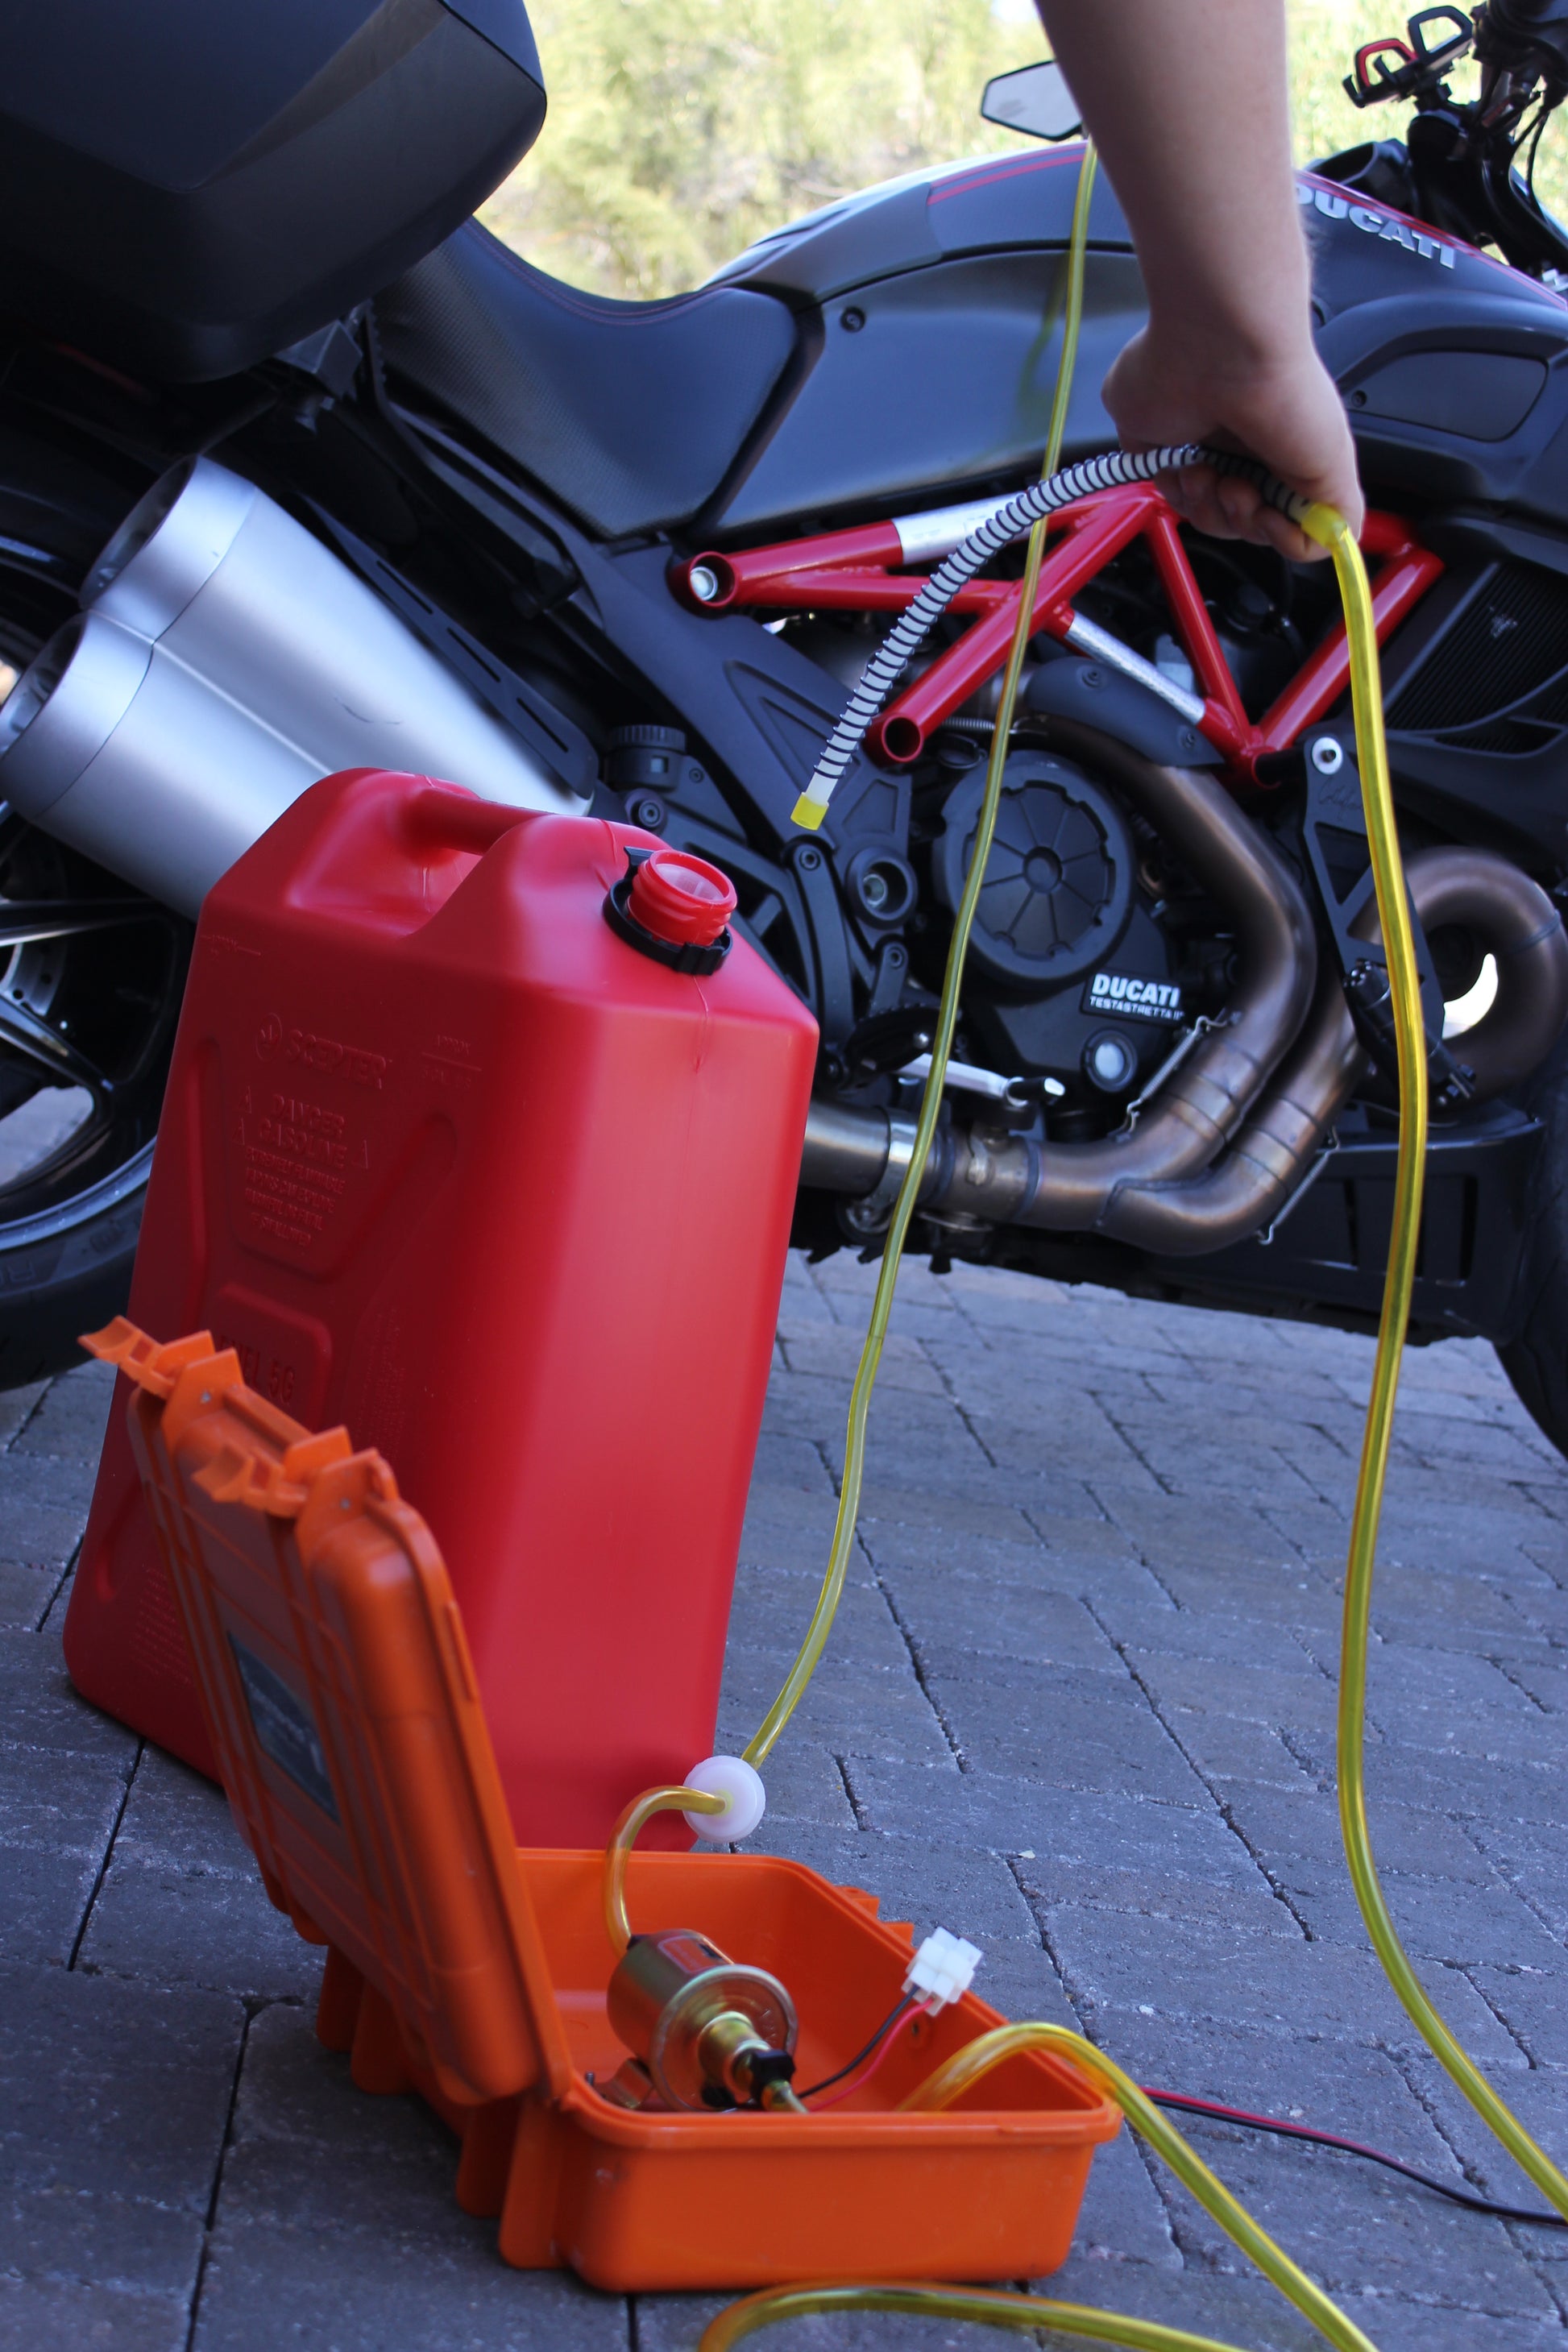 12-volt transfer system being used to move gasoline from motorcycle tank into gas can